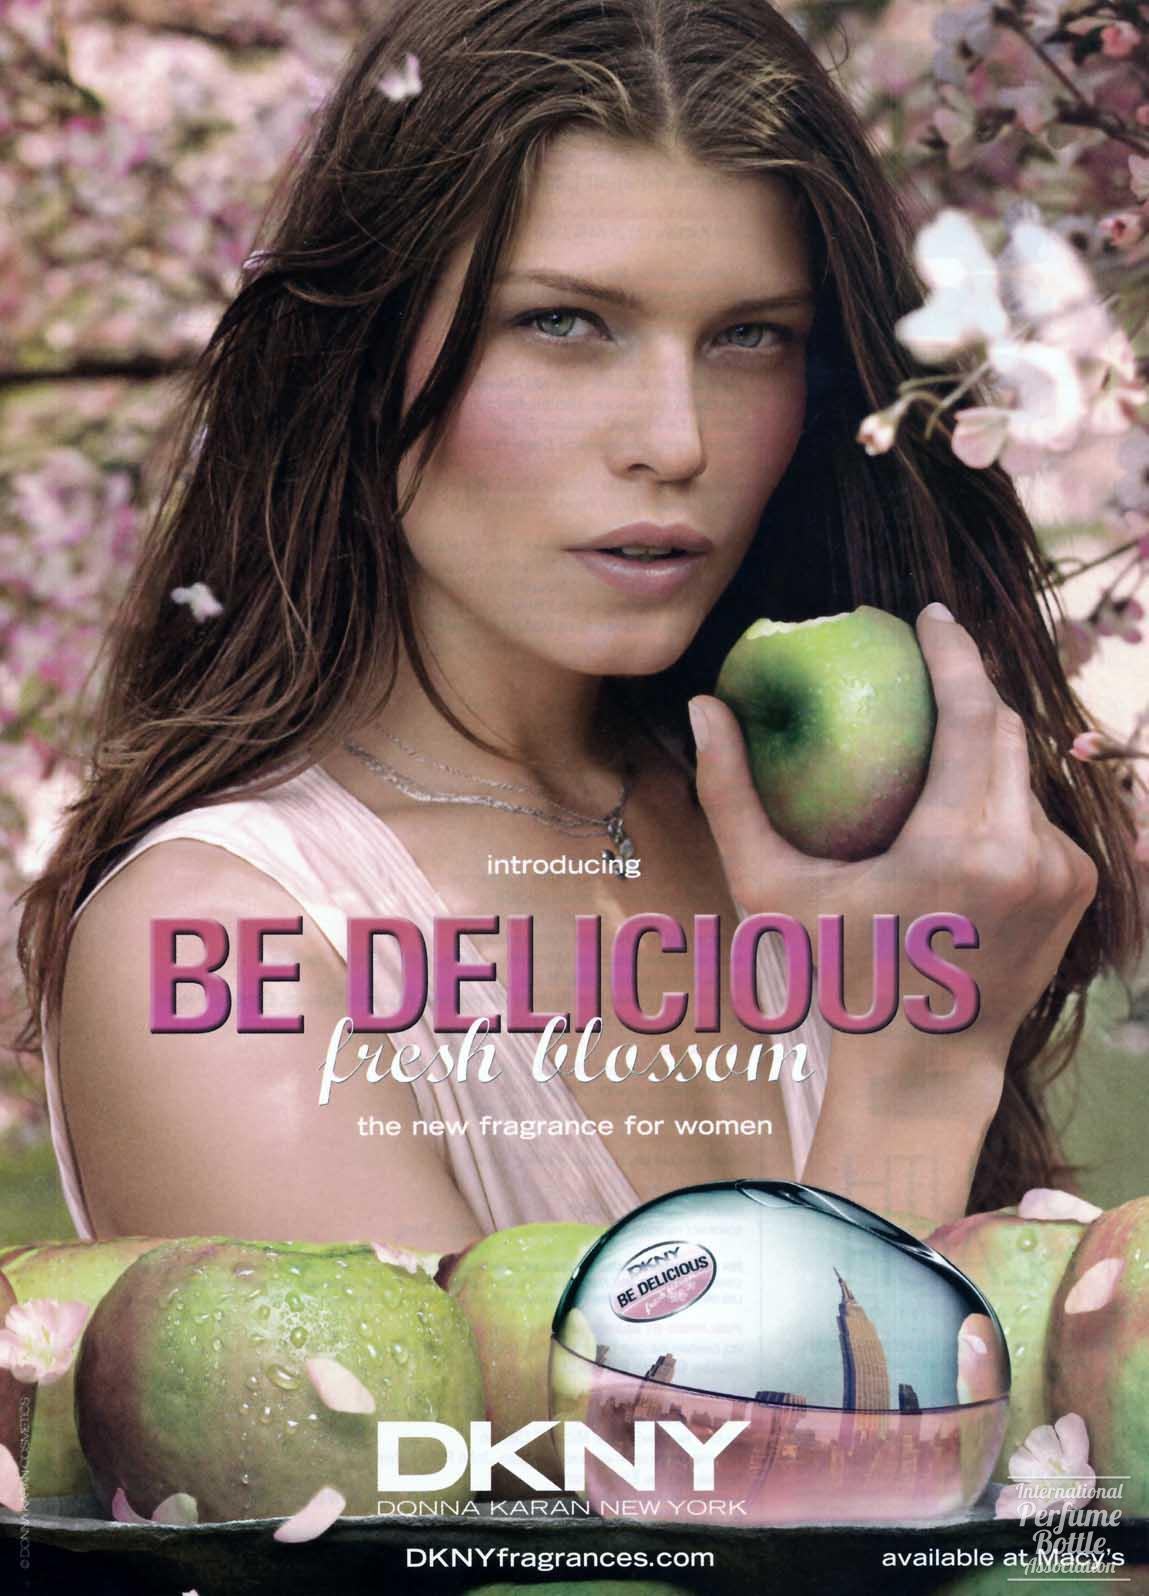 "Be Delicious" by Donna Karan Advertisement - 2009